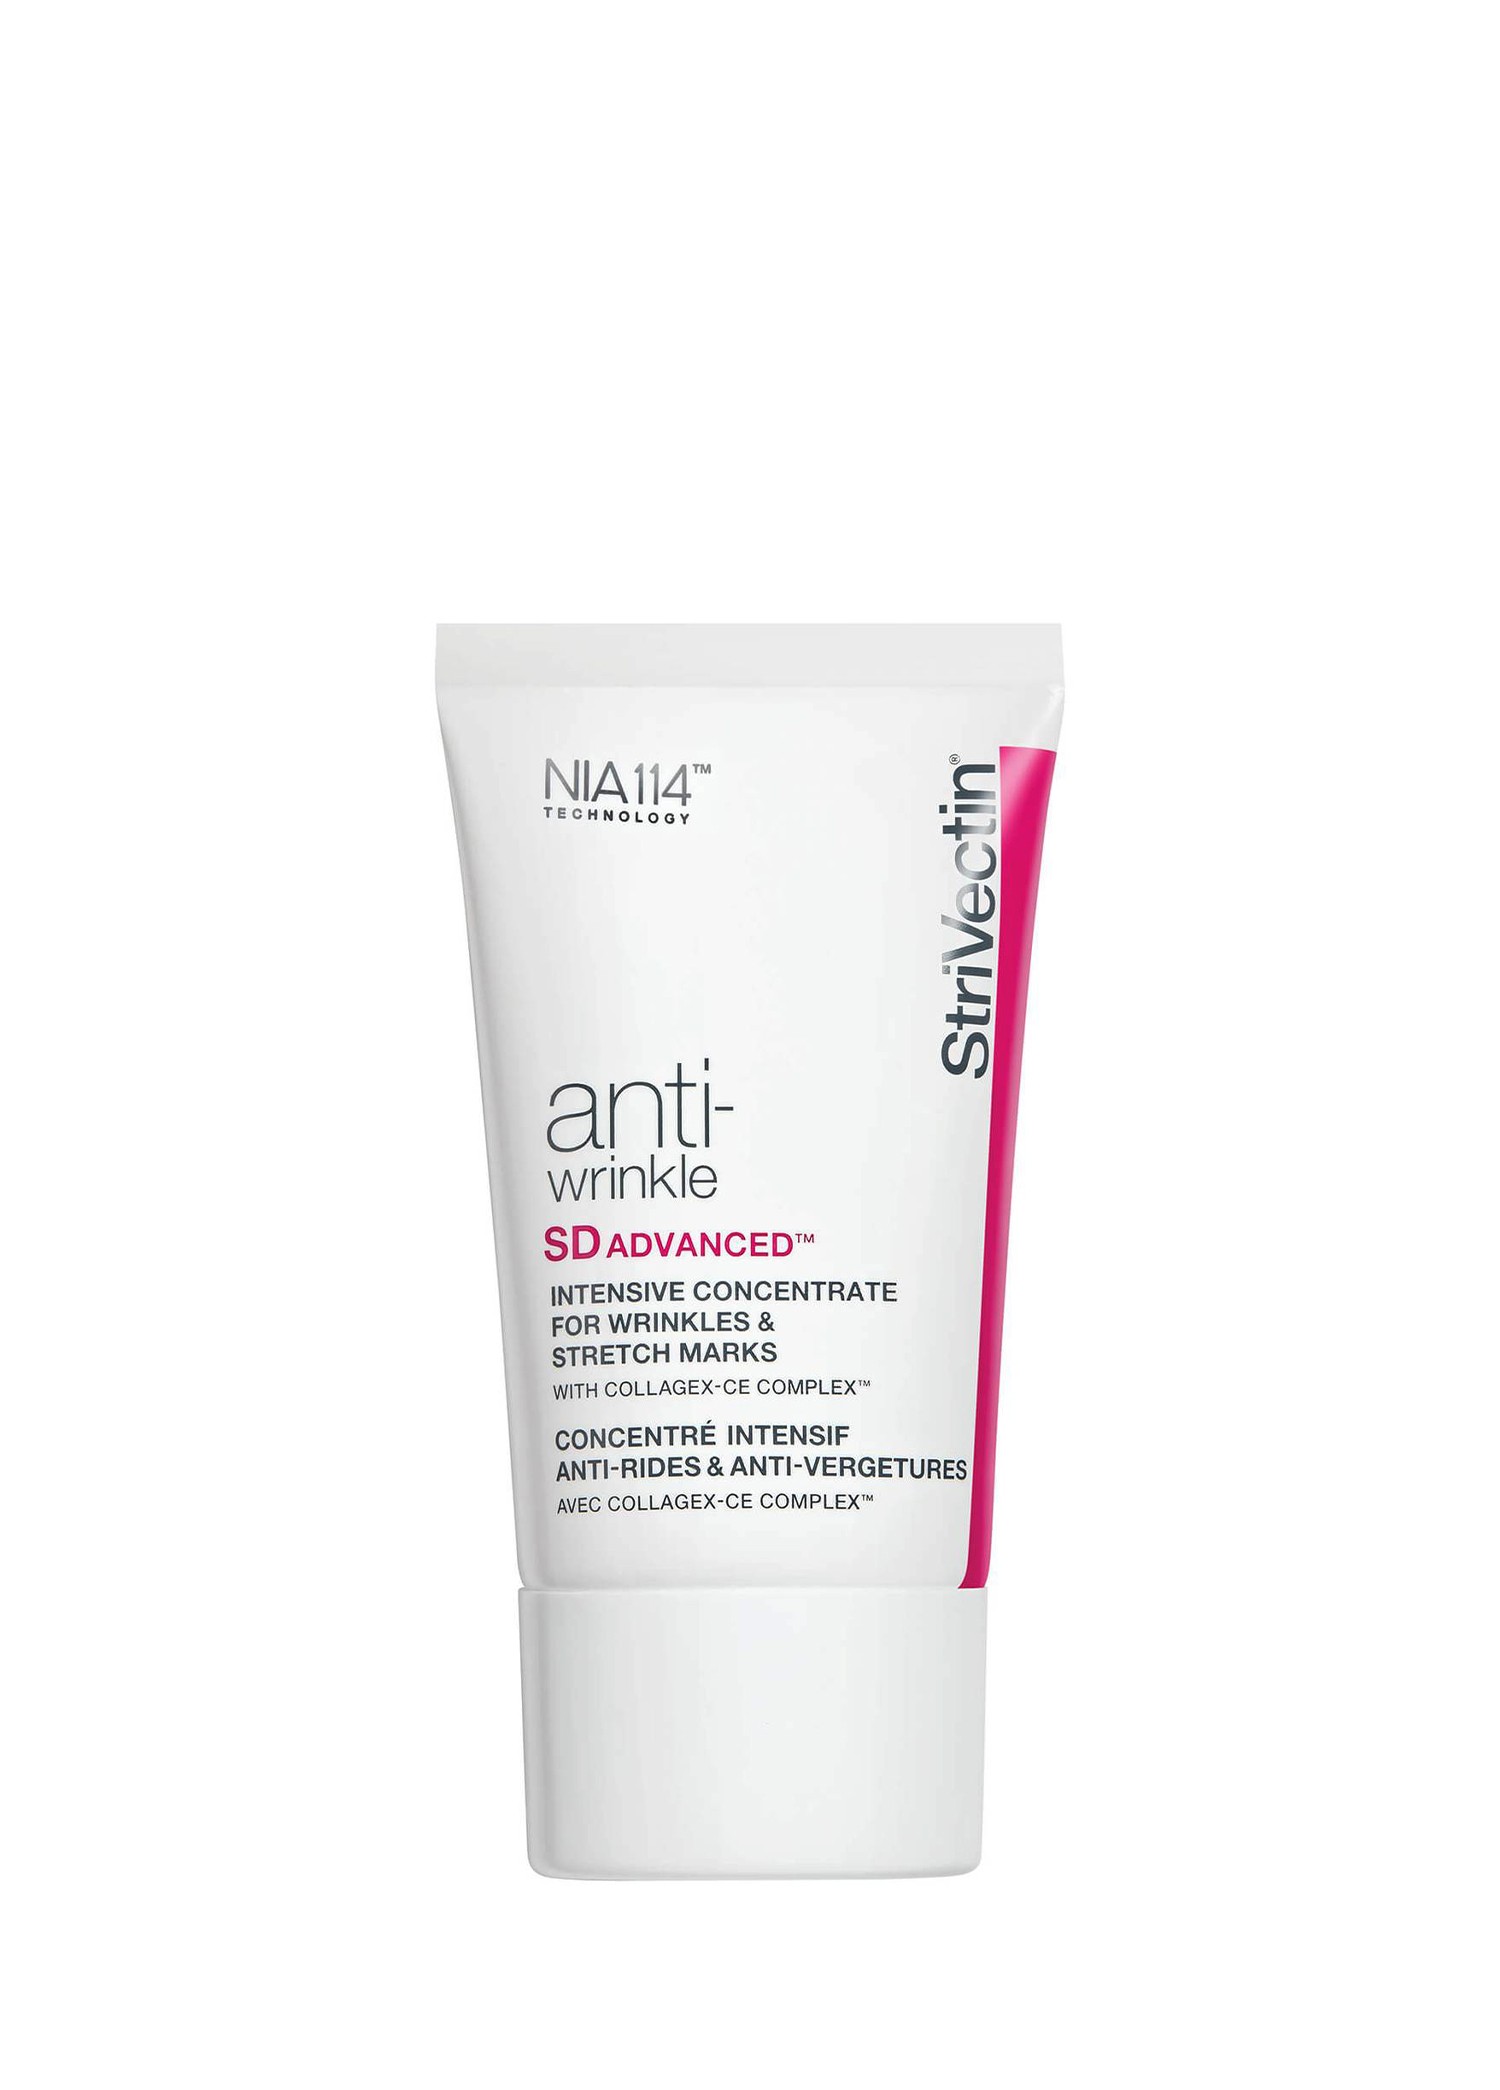 Anti Wrinkle SD Advanced Plus Intensive Moisturizing Concentrate 60 ml